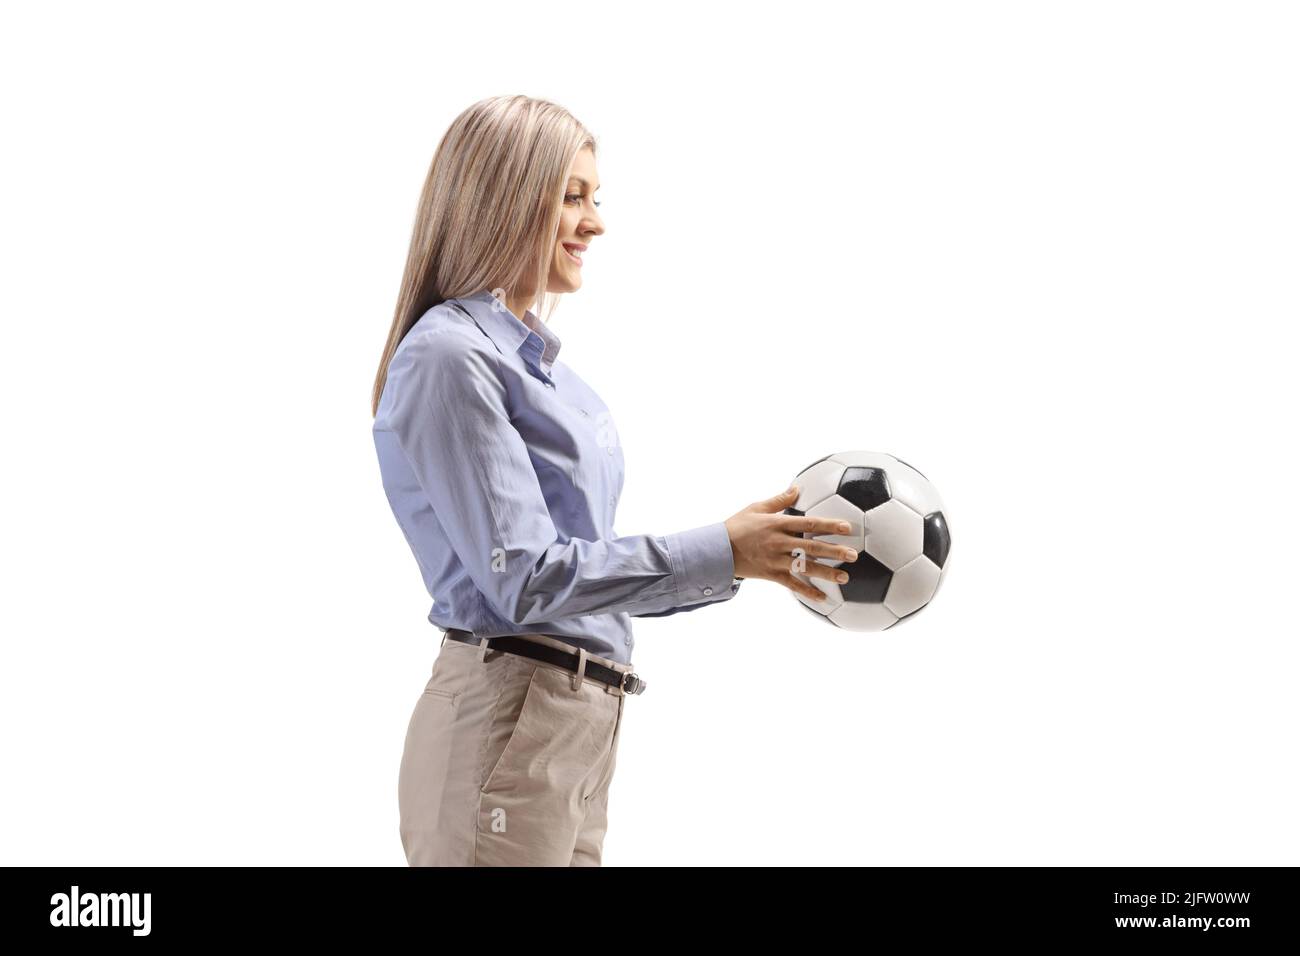 Profile shot of a woman in formal clothes holding a football isolated on white background Stock Photo